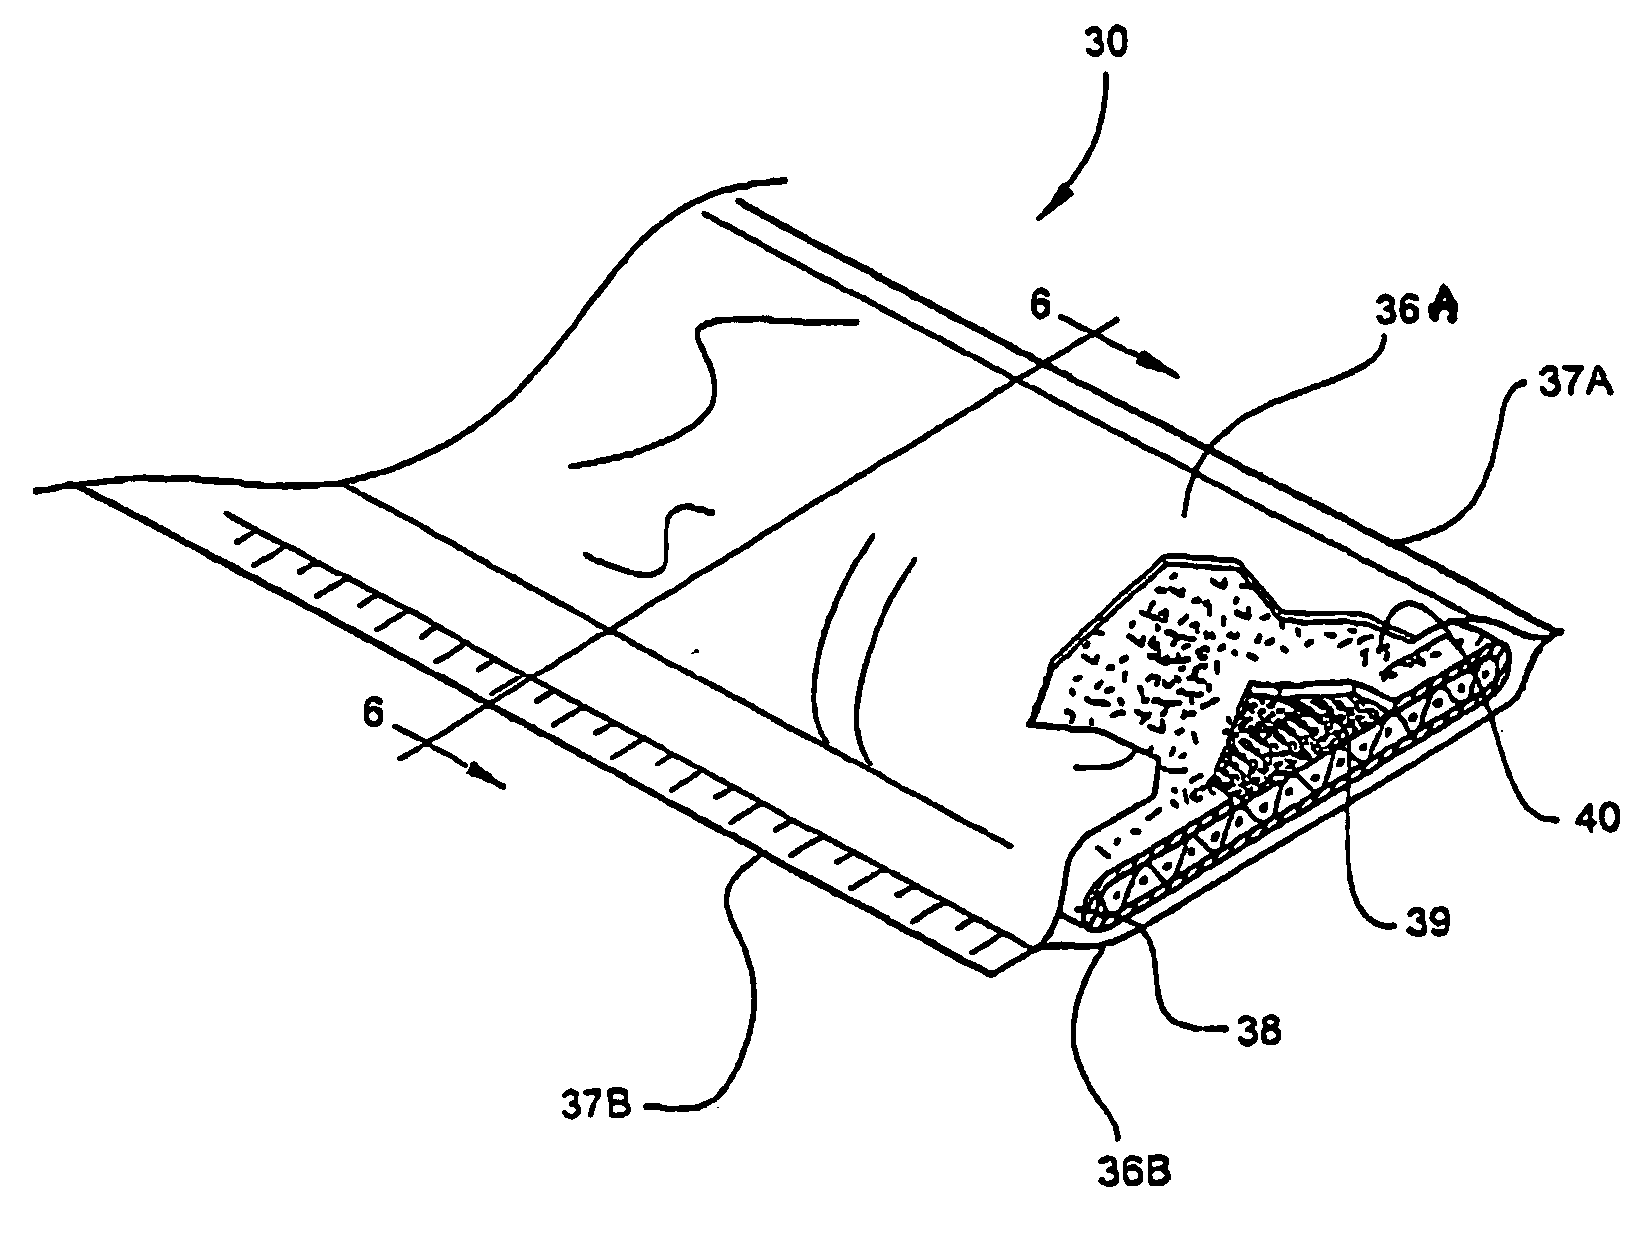 Knitted substrate for use in medical bandaging product bandaging product and method of forming the same